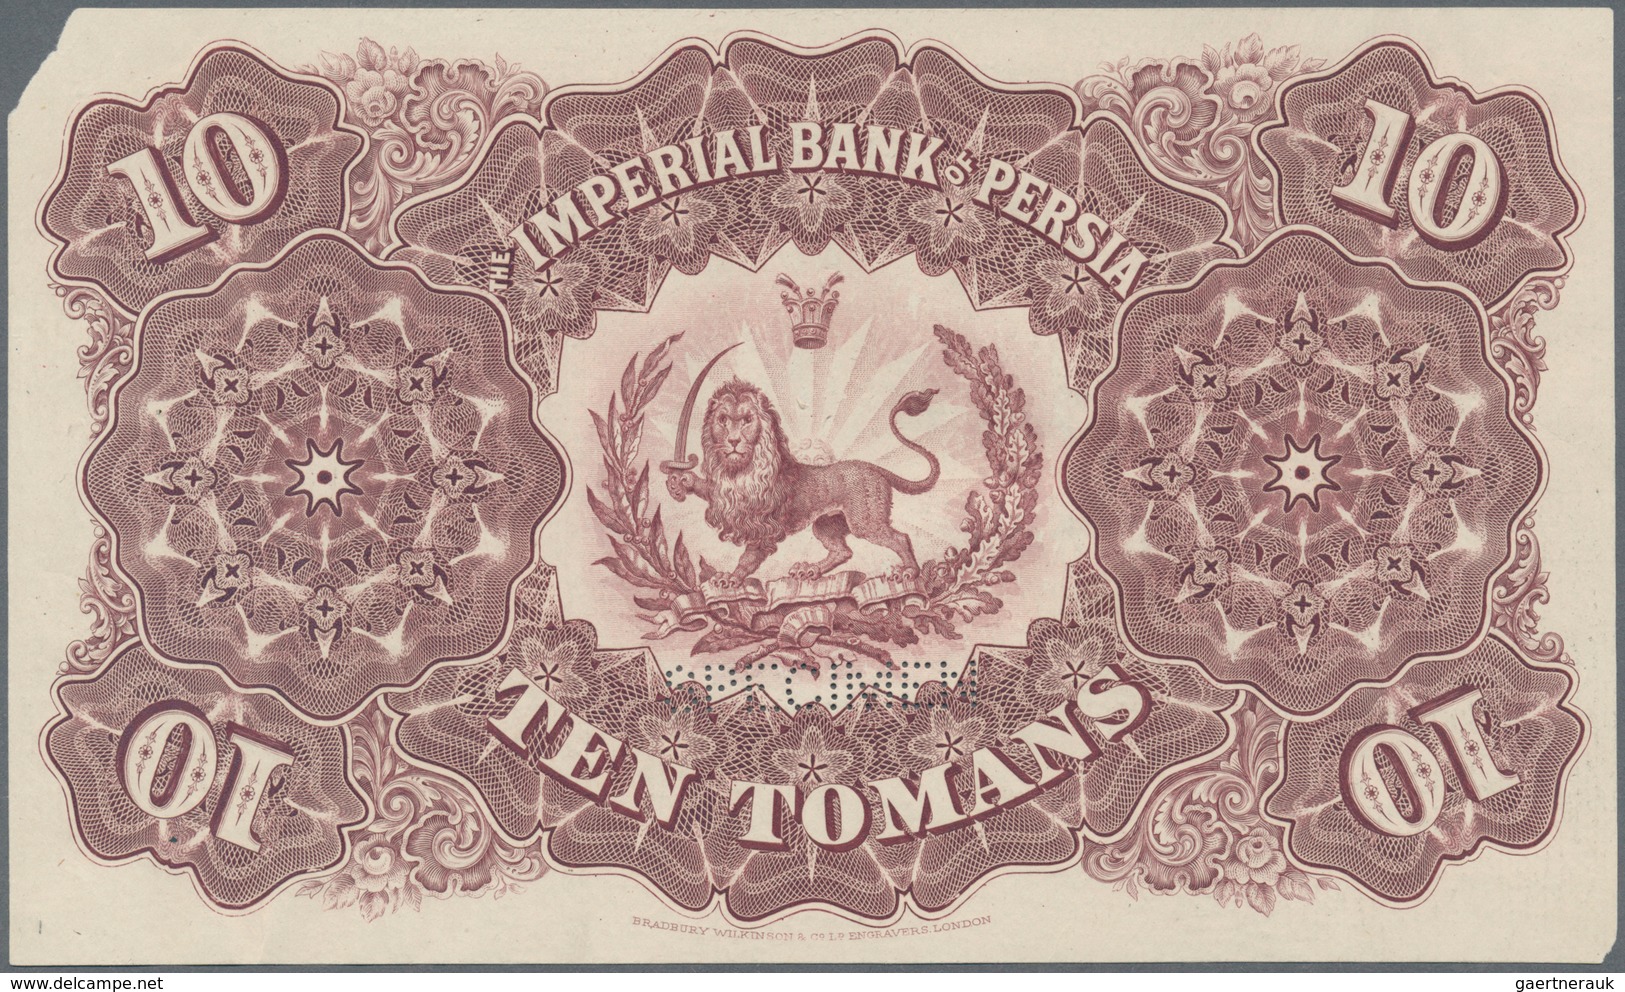 Iran: Imperial Bank Of Persia Front And Reverse Specimen Of 10 Toman July 1st 1897, Printed By Bradb - Iran